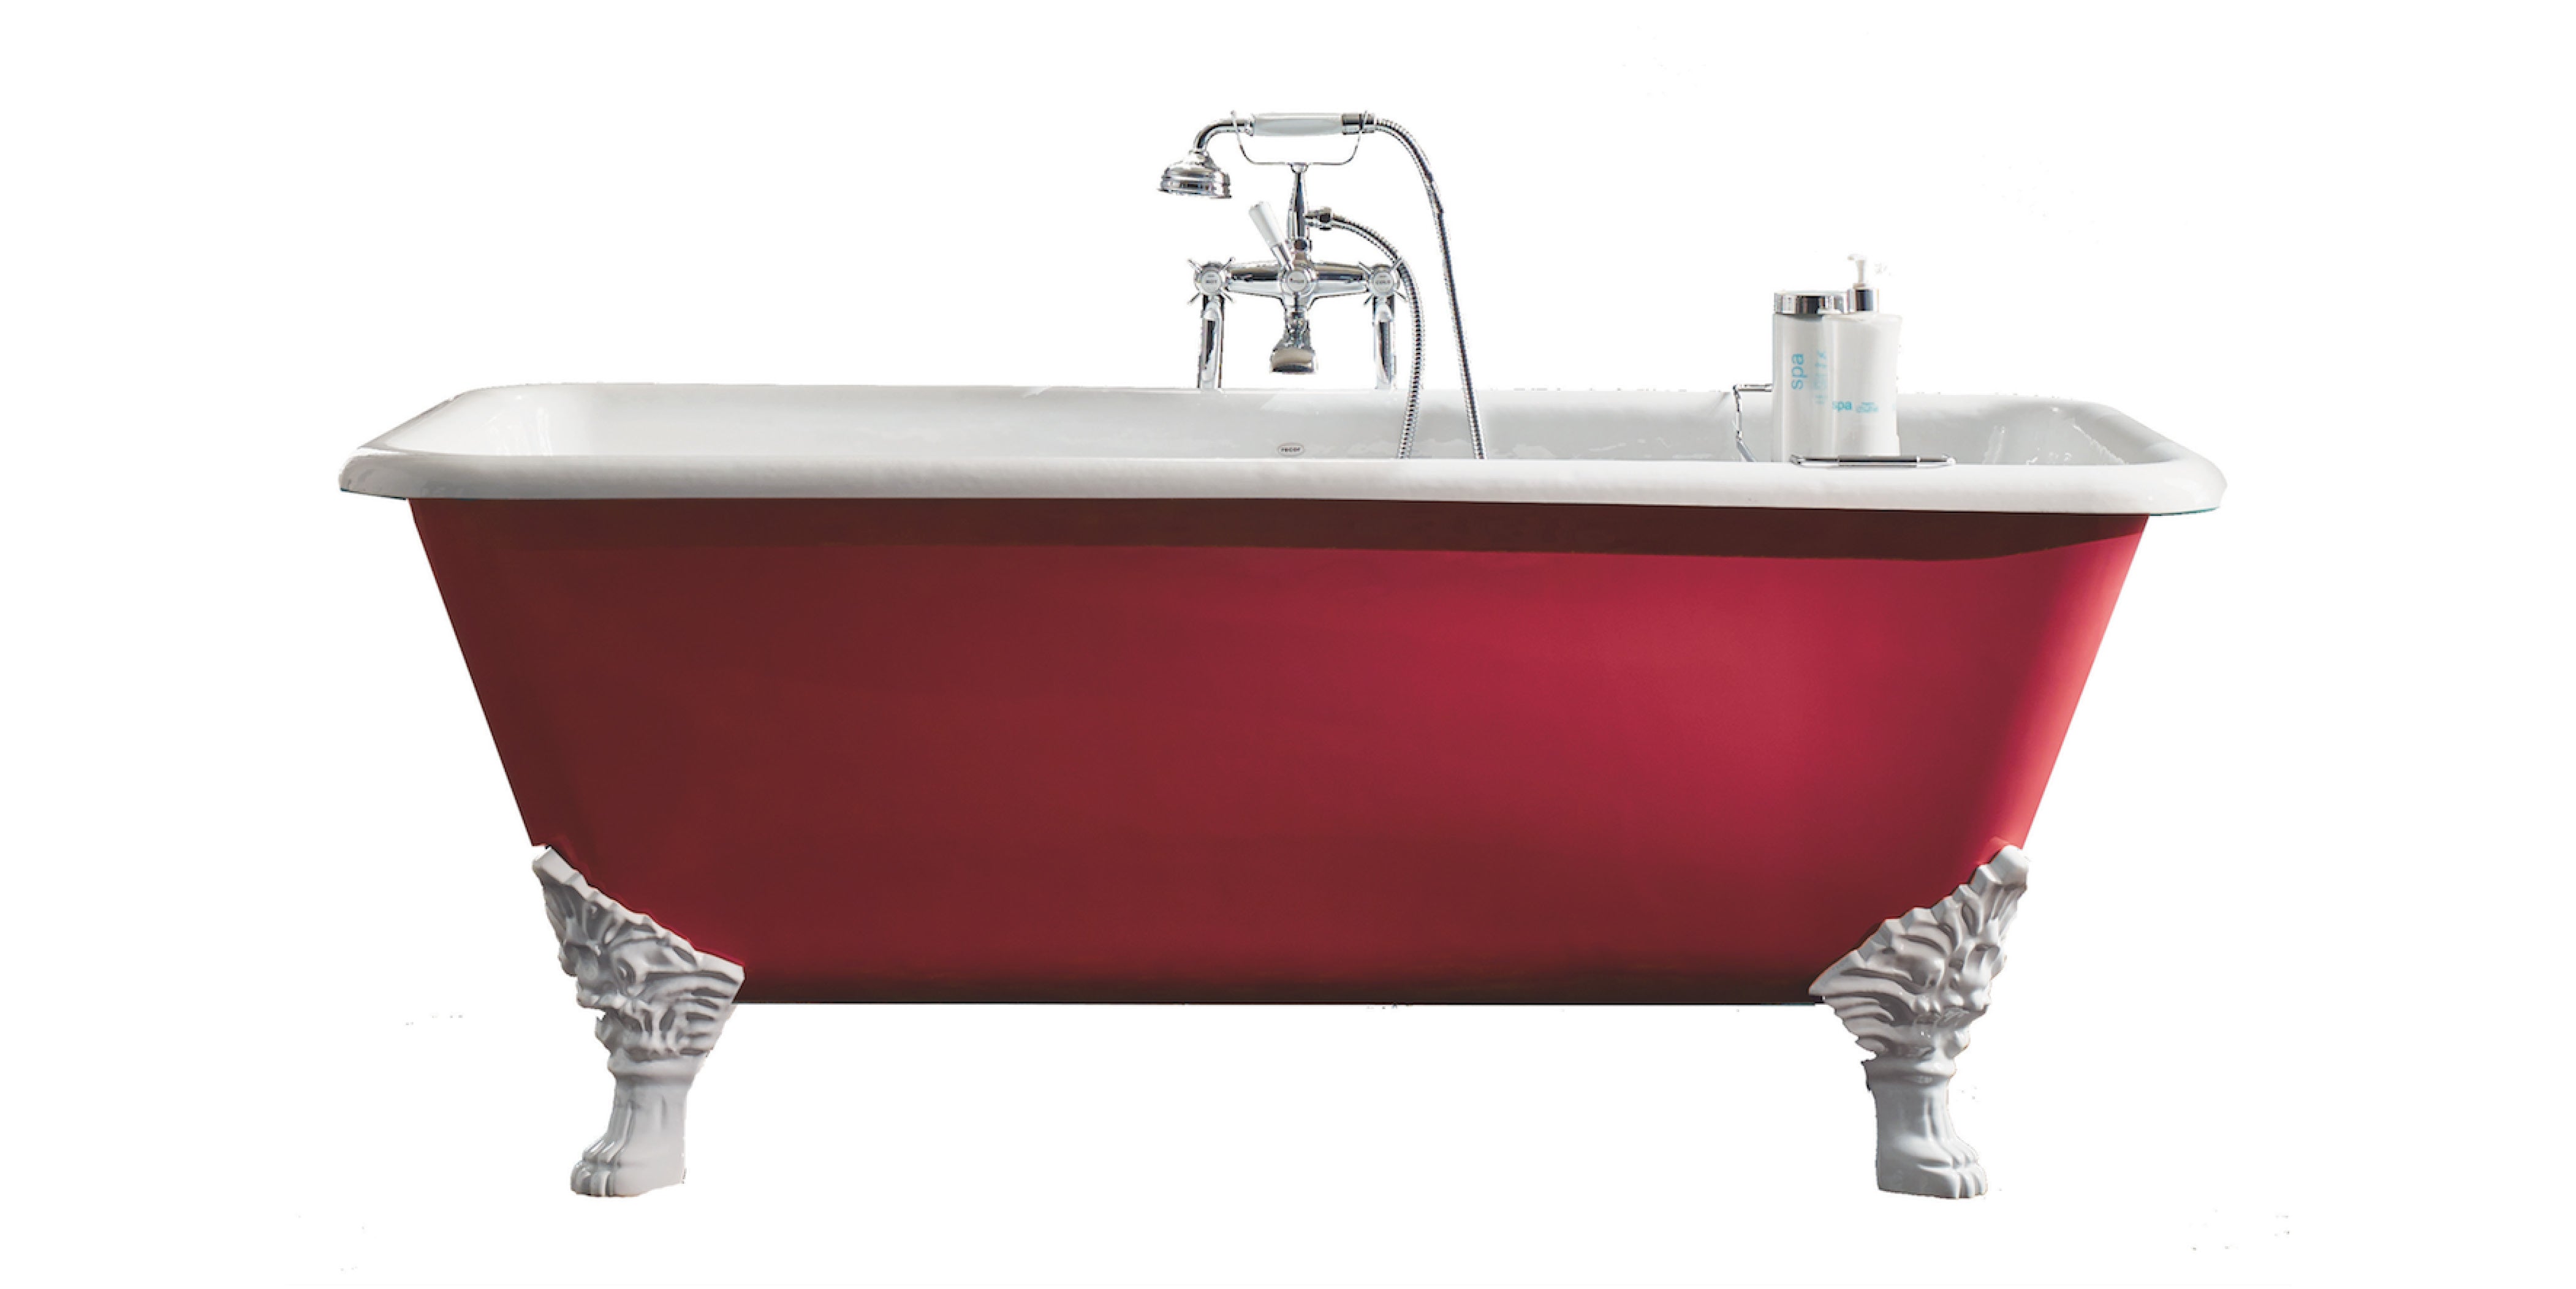 astonian hanover cast iron roll top bathtub with ornate claw feet from aston matthews